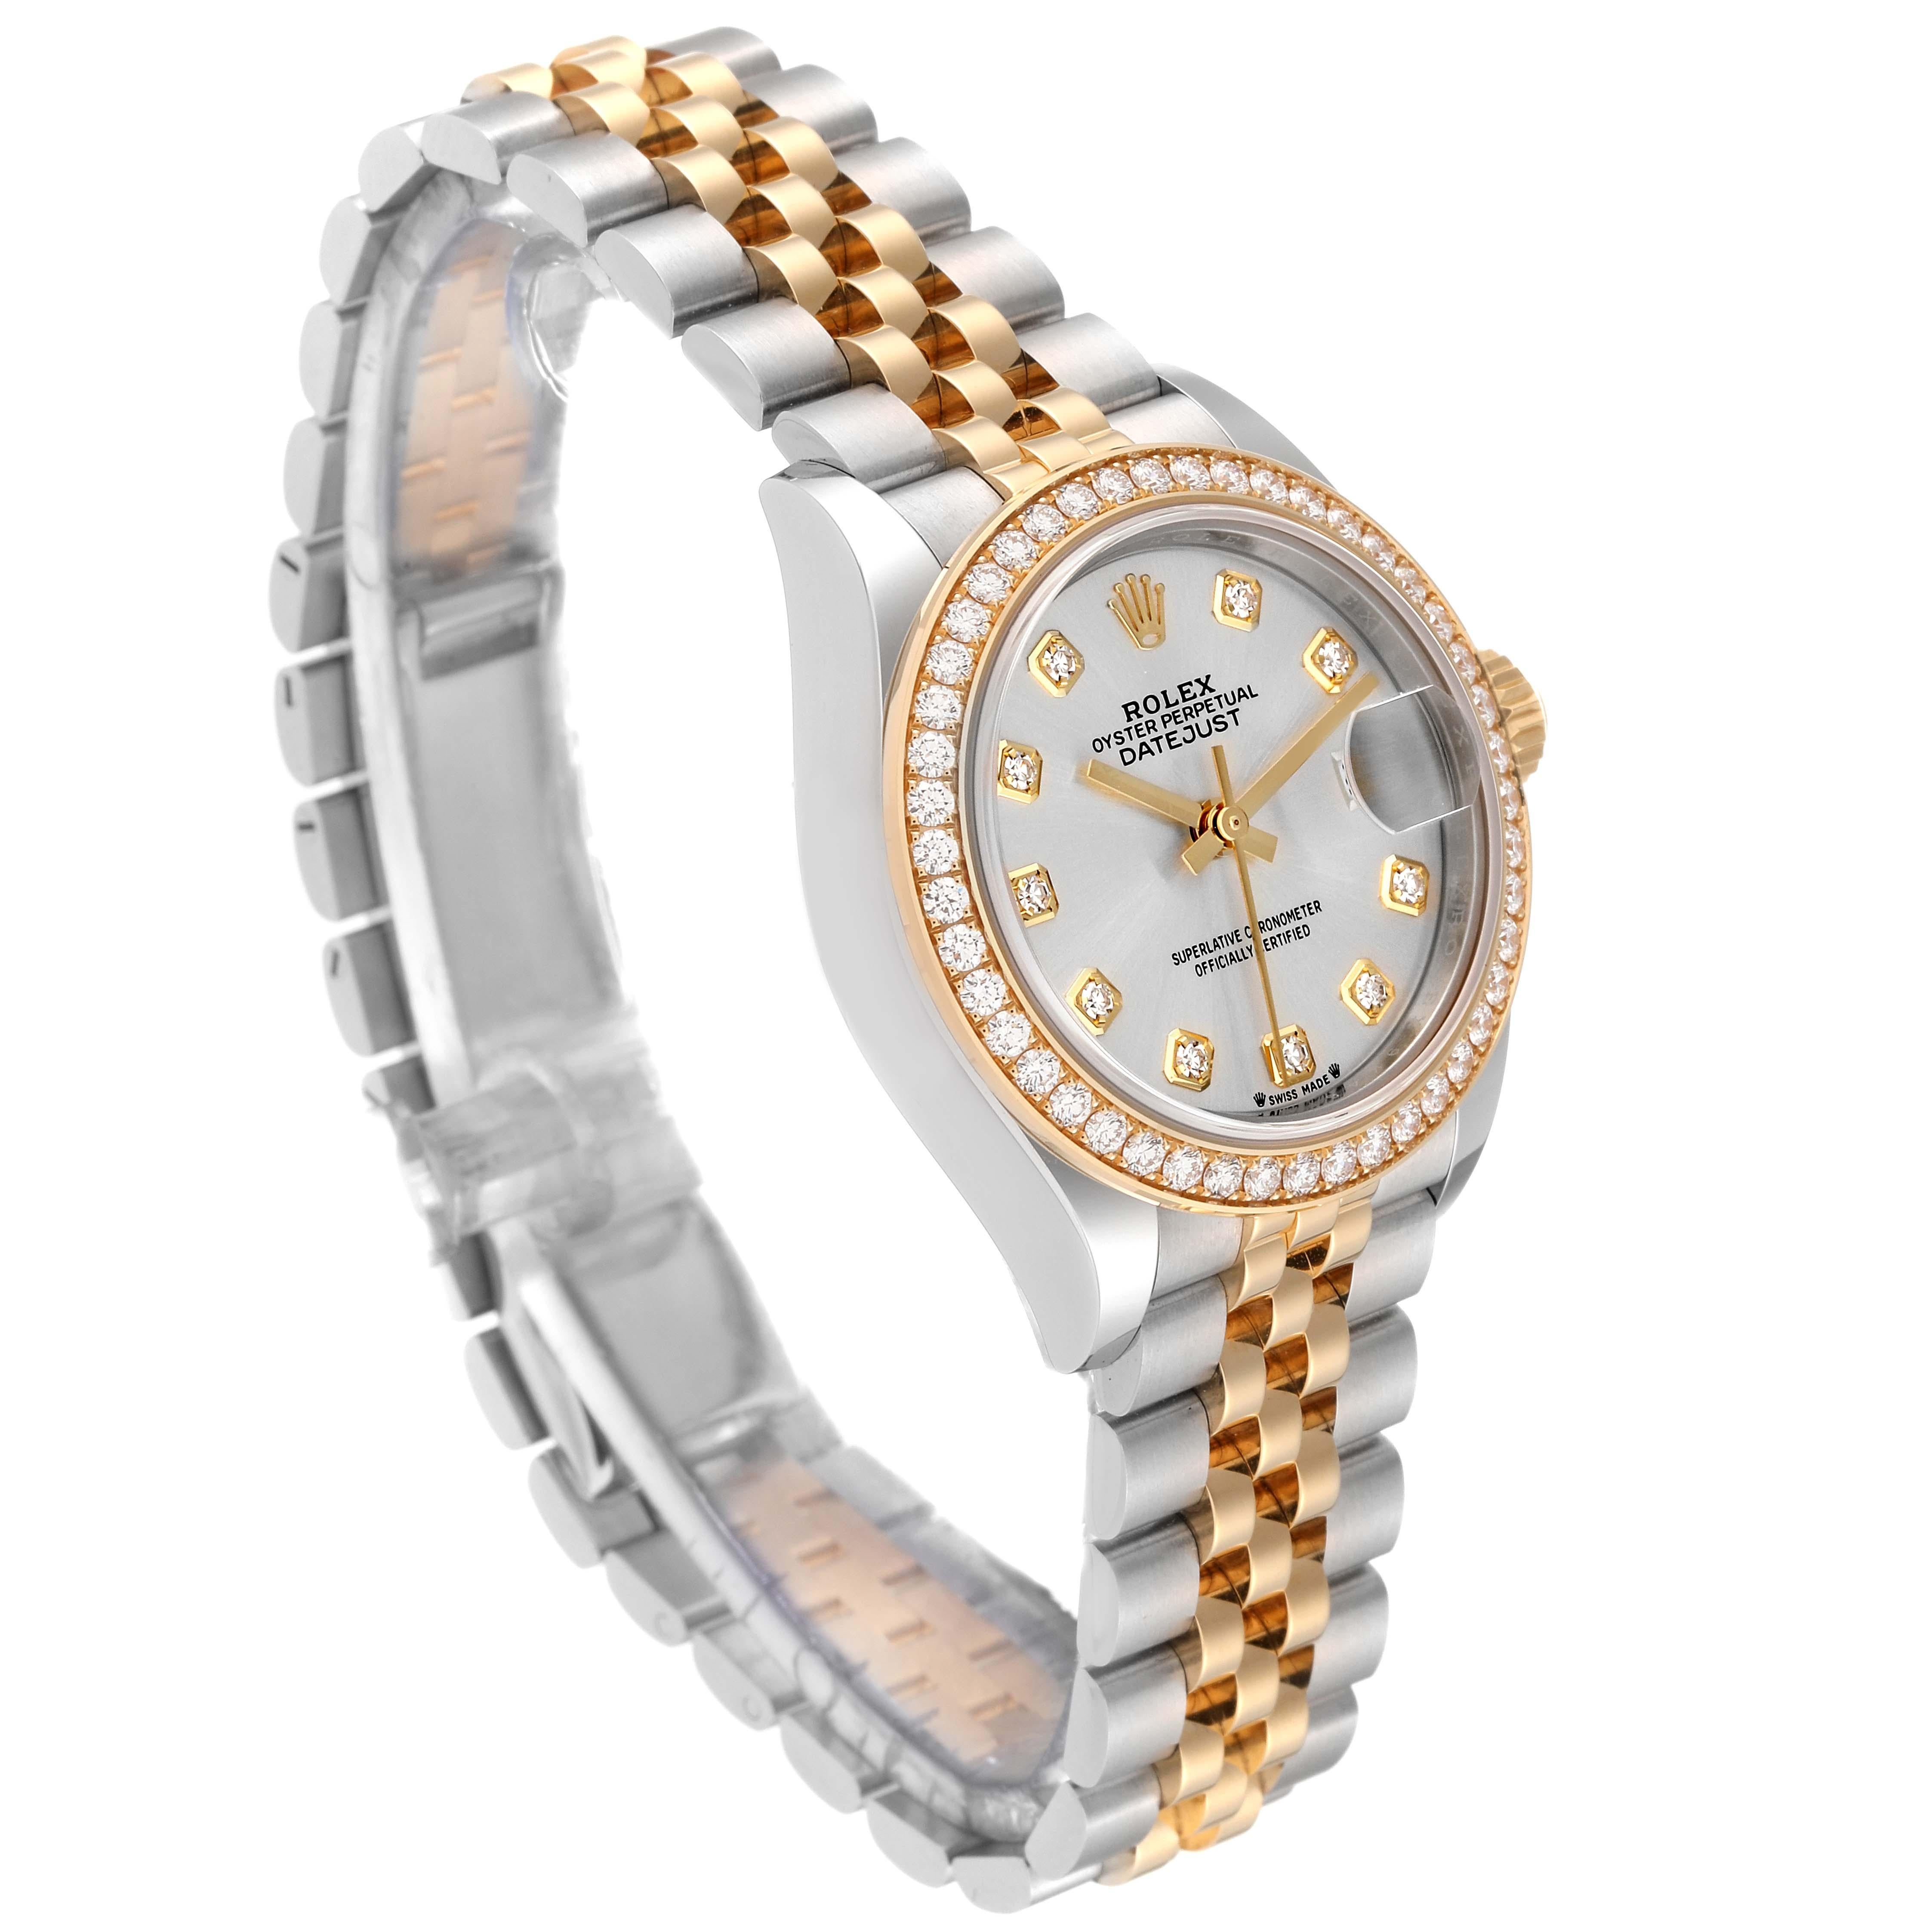 Rolex Datejust Steel Yellow Gold Diamond Ladies Watch 279383 Unworn. Officially certified chronometer automatic self-winding movement. Stainless steel oyster case 28.0 mm in diameter. Rolex logo on an 18K yellow gold crown. 18k yellow gold original